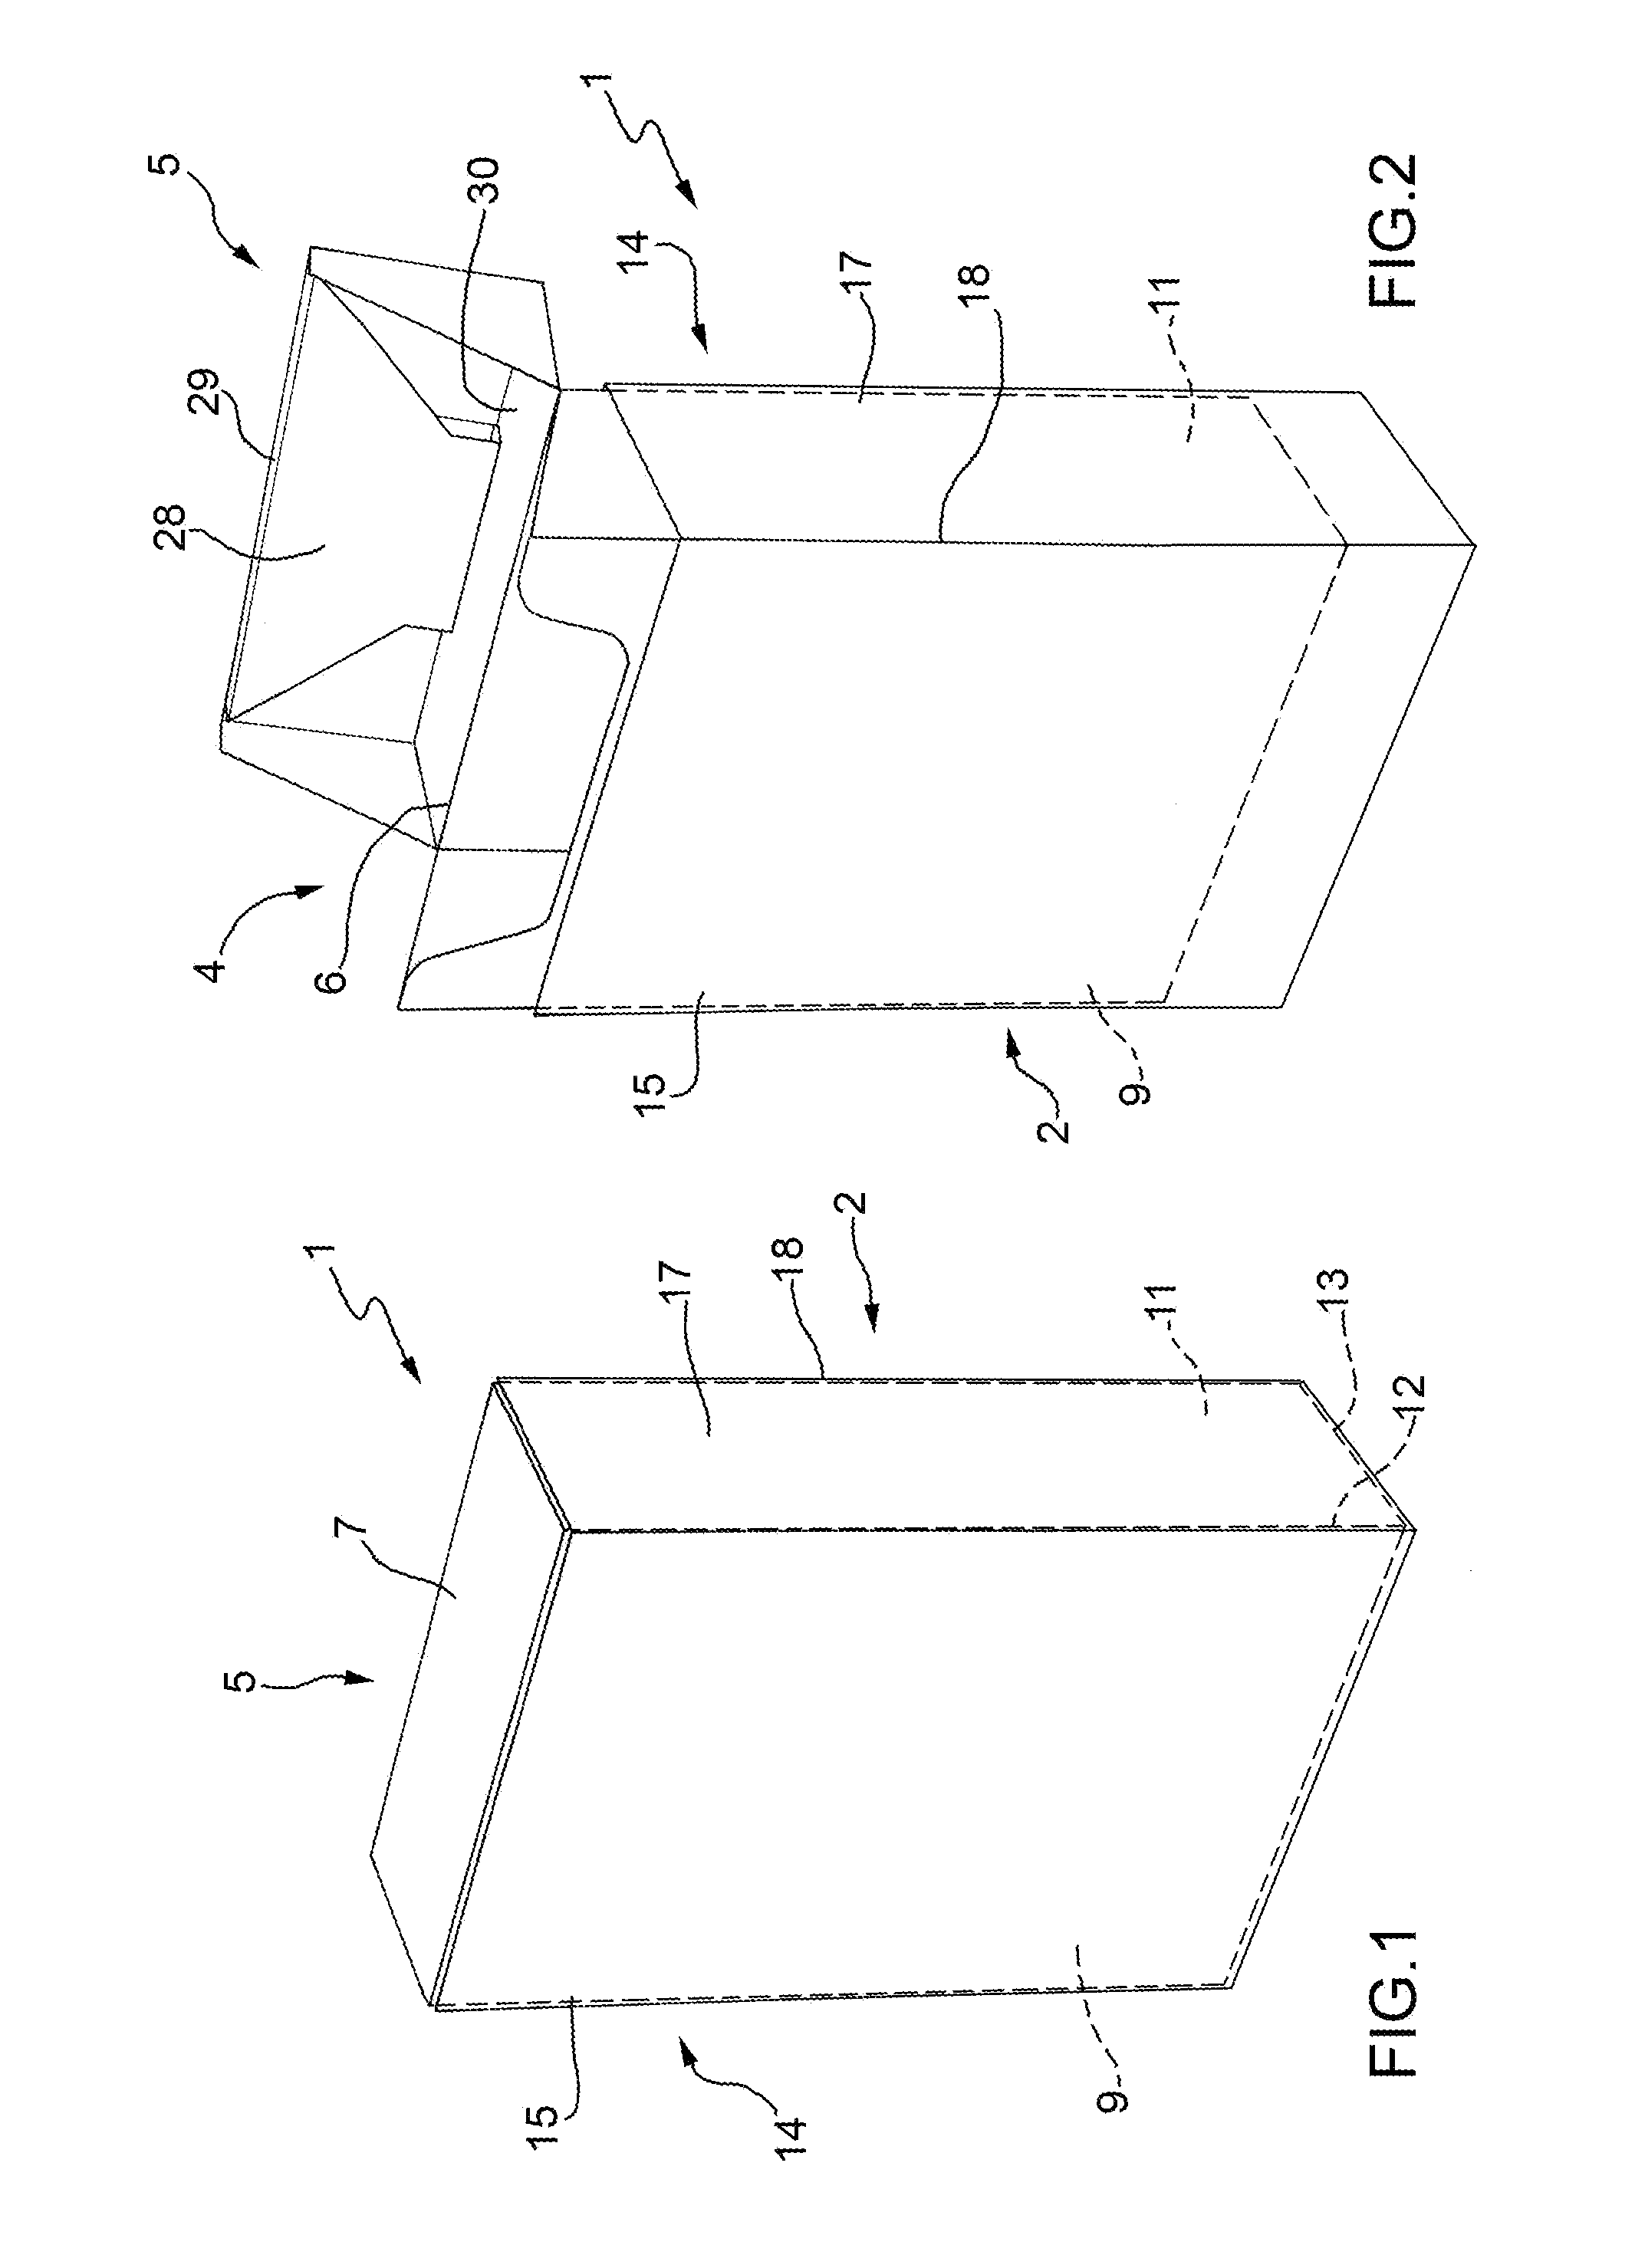 Cigarette Packing Machine for Producing a Rigid, Hinged-Lid Packet